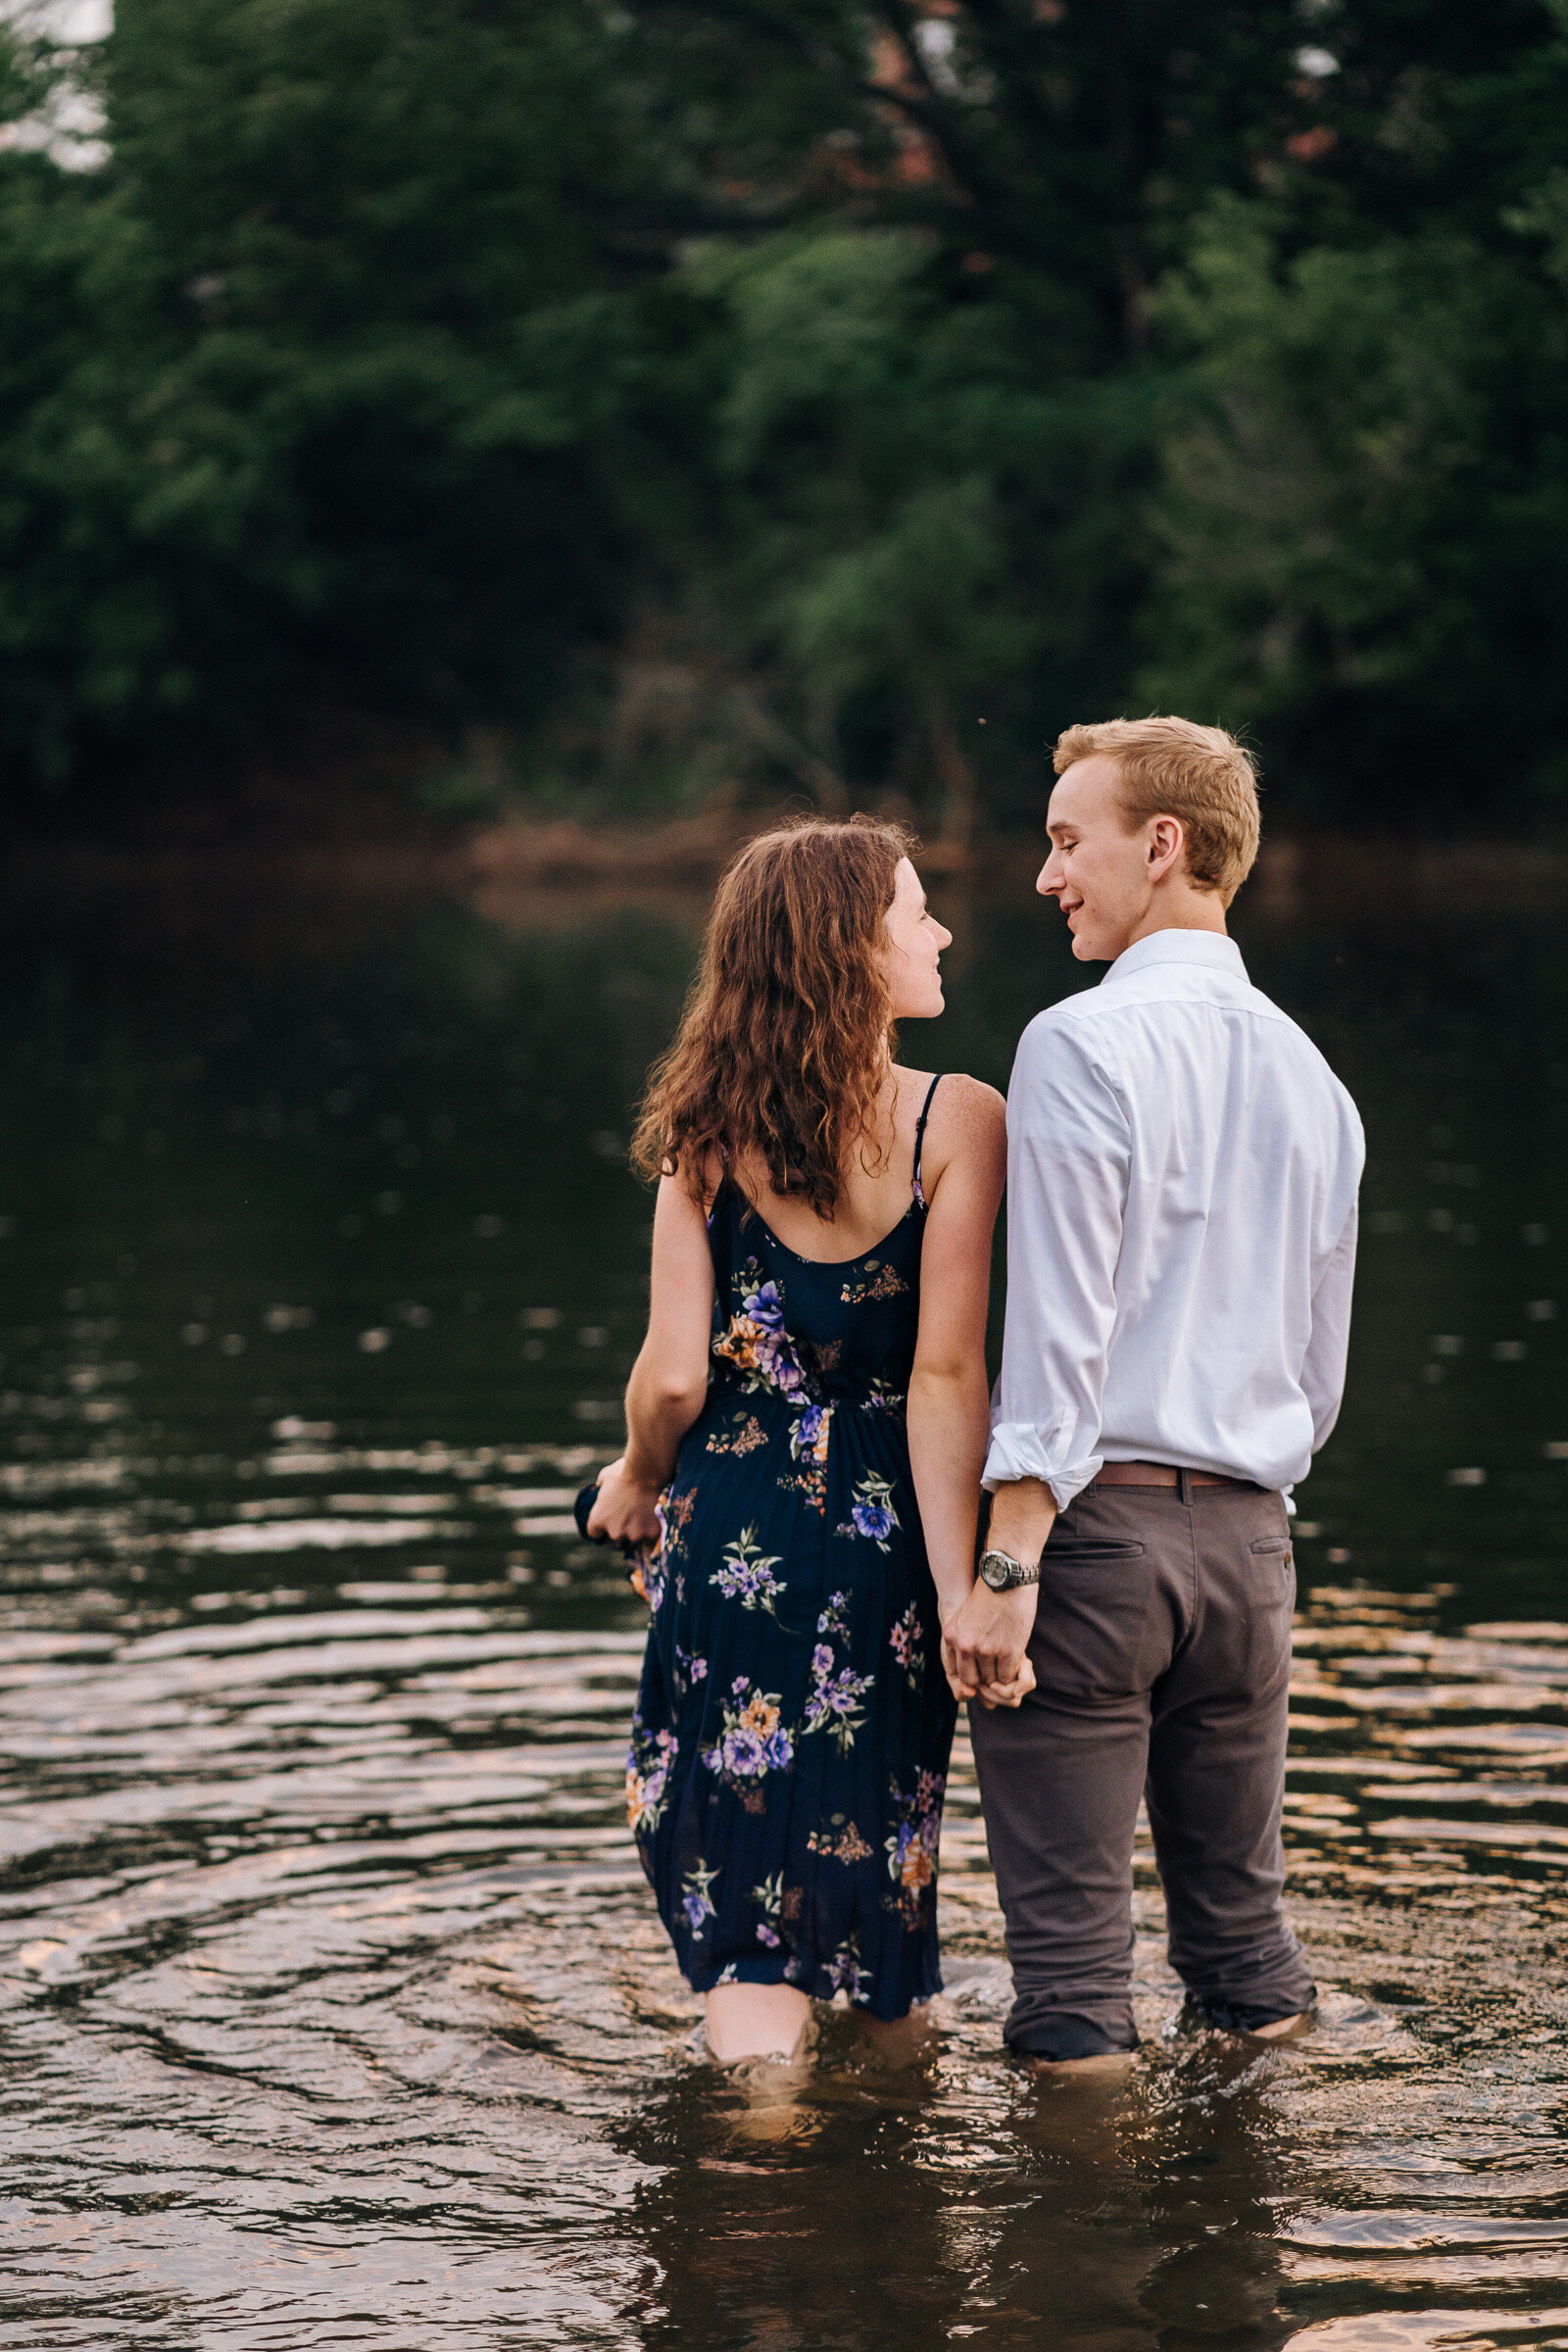 grant-rachel-downtown-lynchburg-virginia-summer-lifestyle-in-the-river-romantic-flirty-and-fun-engagement-session-by-jonathan-hannah-photography-18.jpg